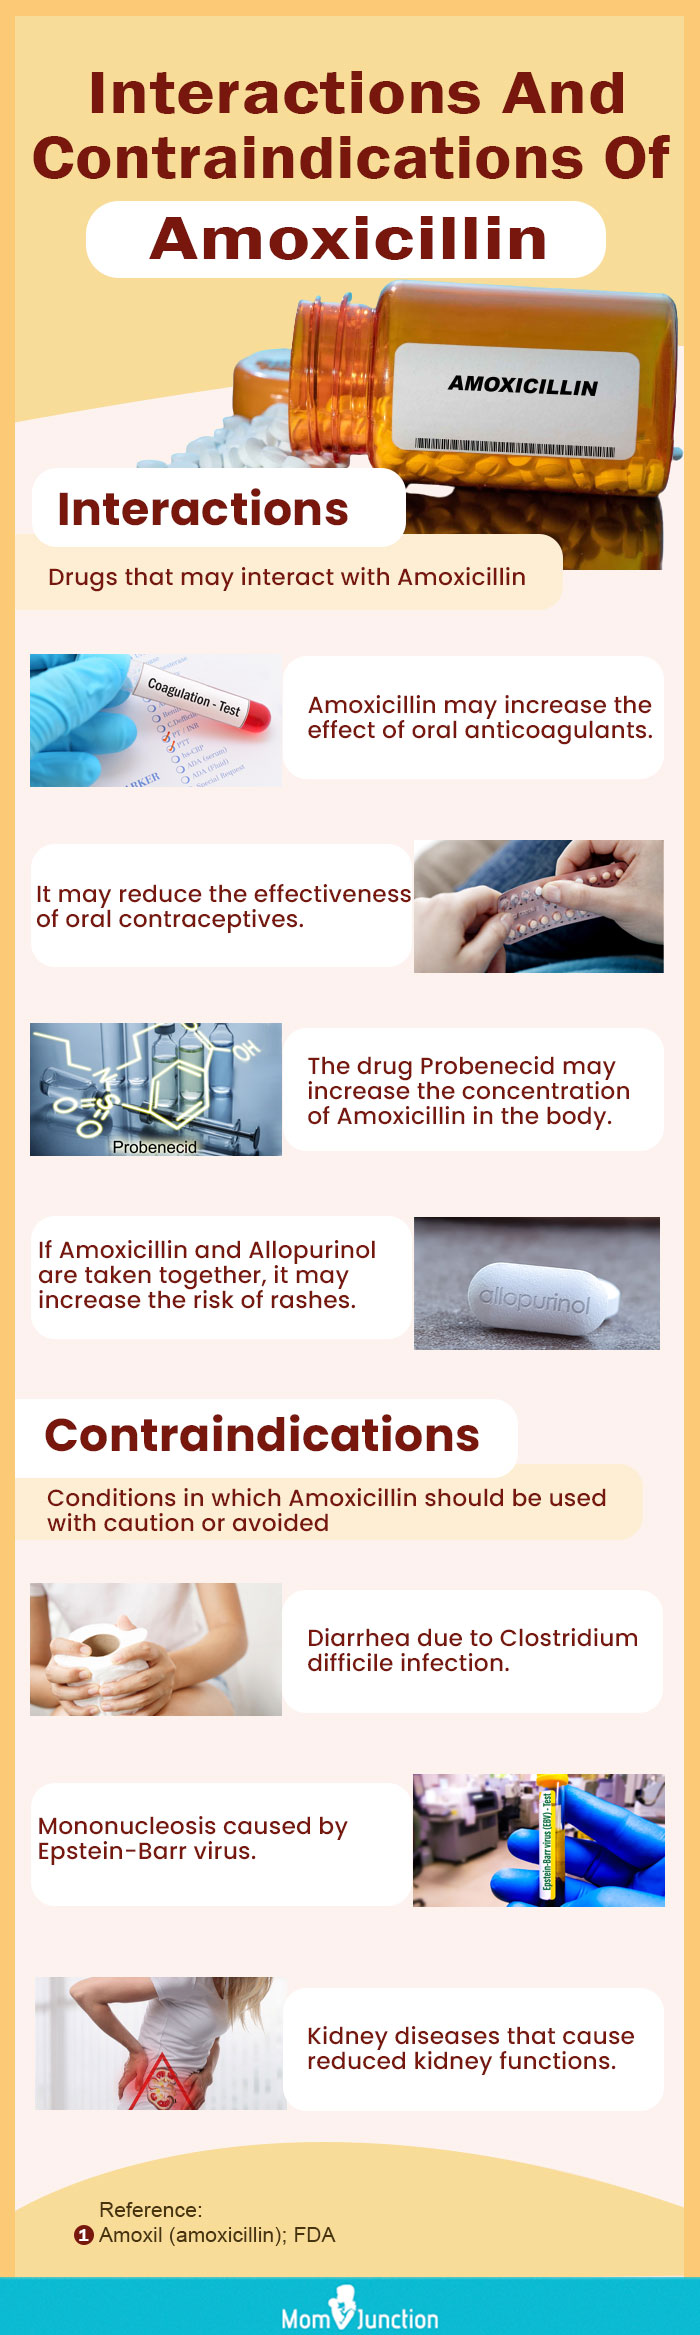 interactions and contraindications of amoxicillin (infographic)